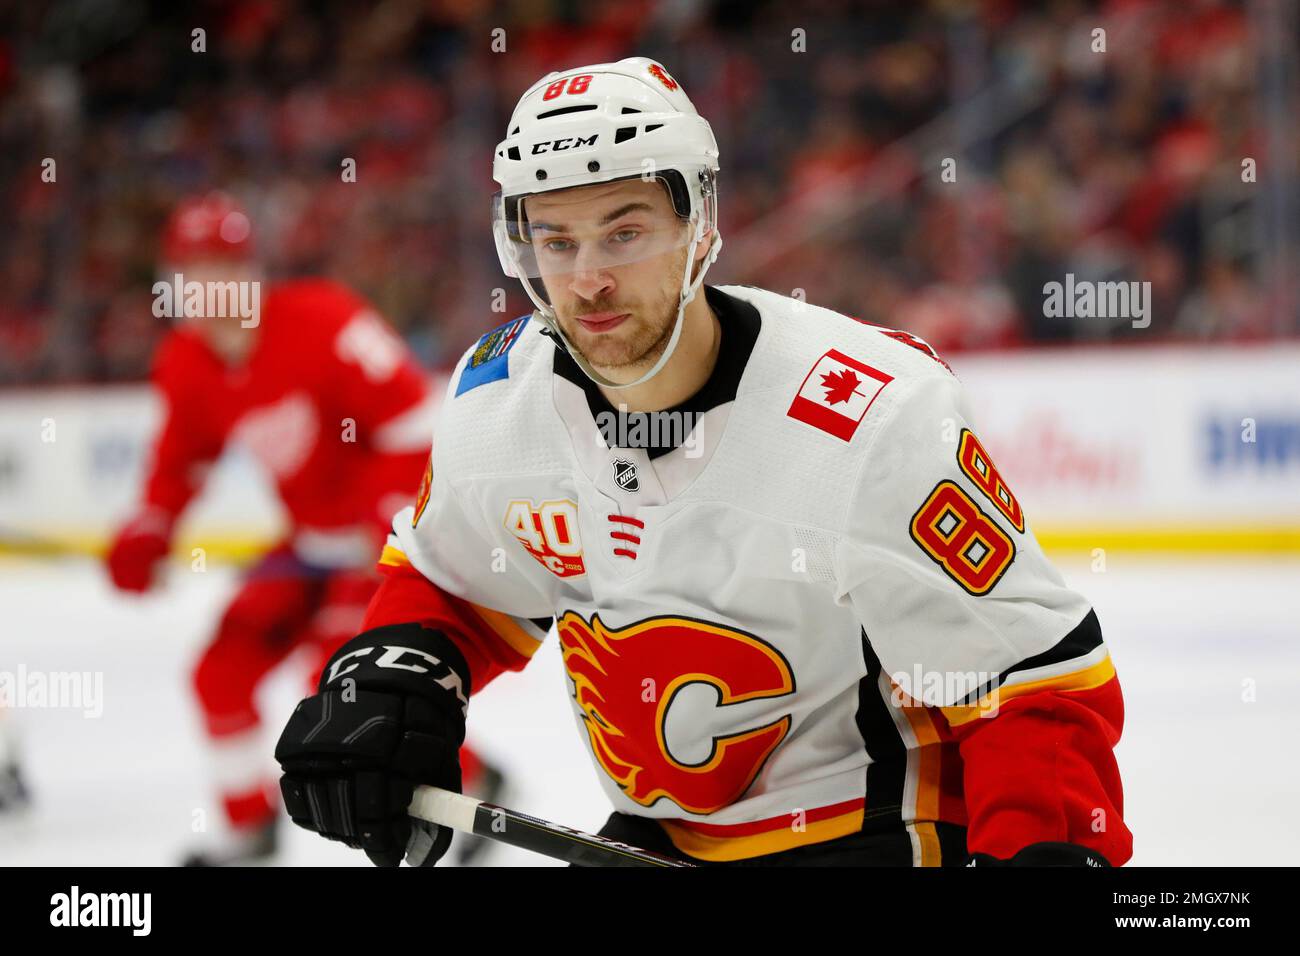 Calgary Flames' Andrew Mangiapane plays during an NHL hockey game